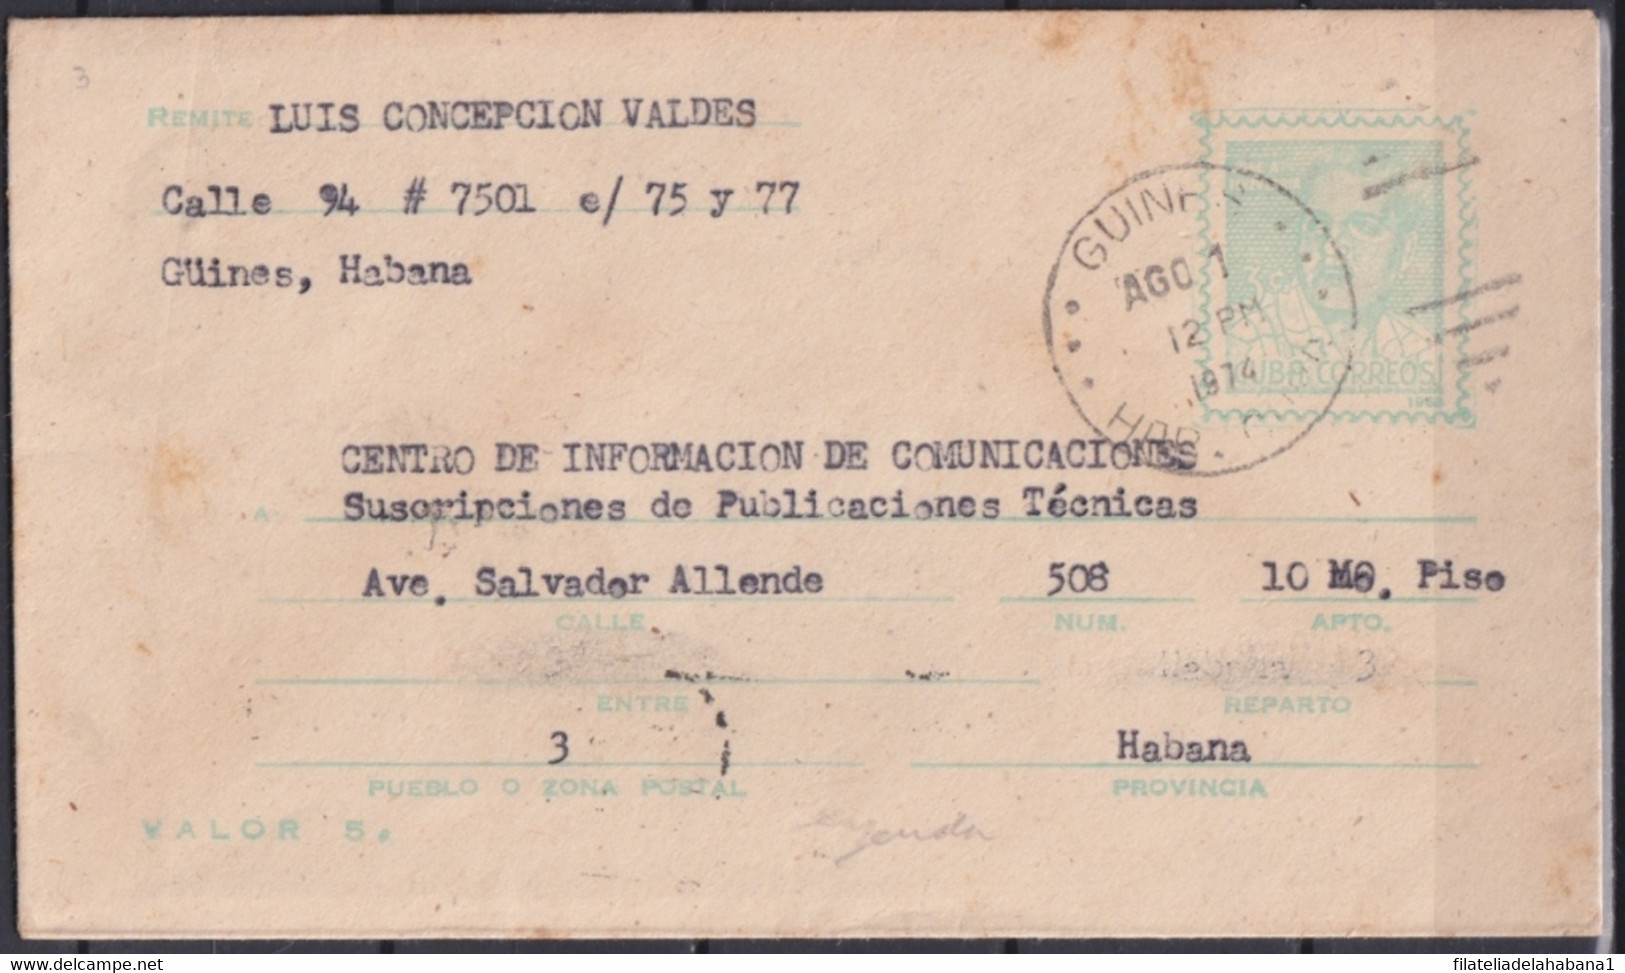 1968-EP-76 CUBA 1968 POSTAL STATIONERY ECHEVARRIA USED GUINES TO HABANA. - Lettres & Documents